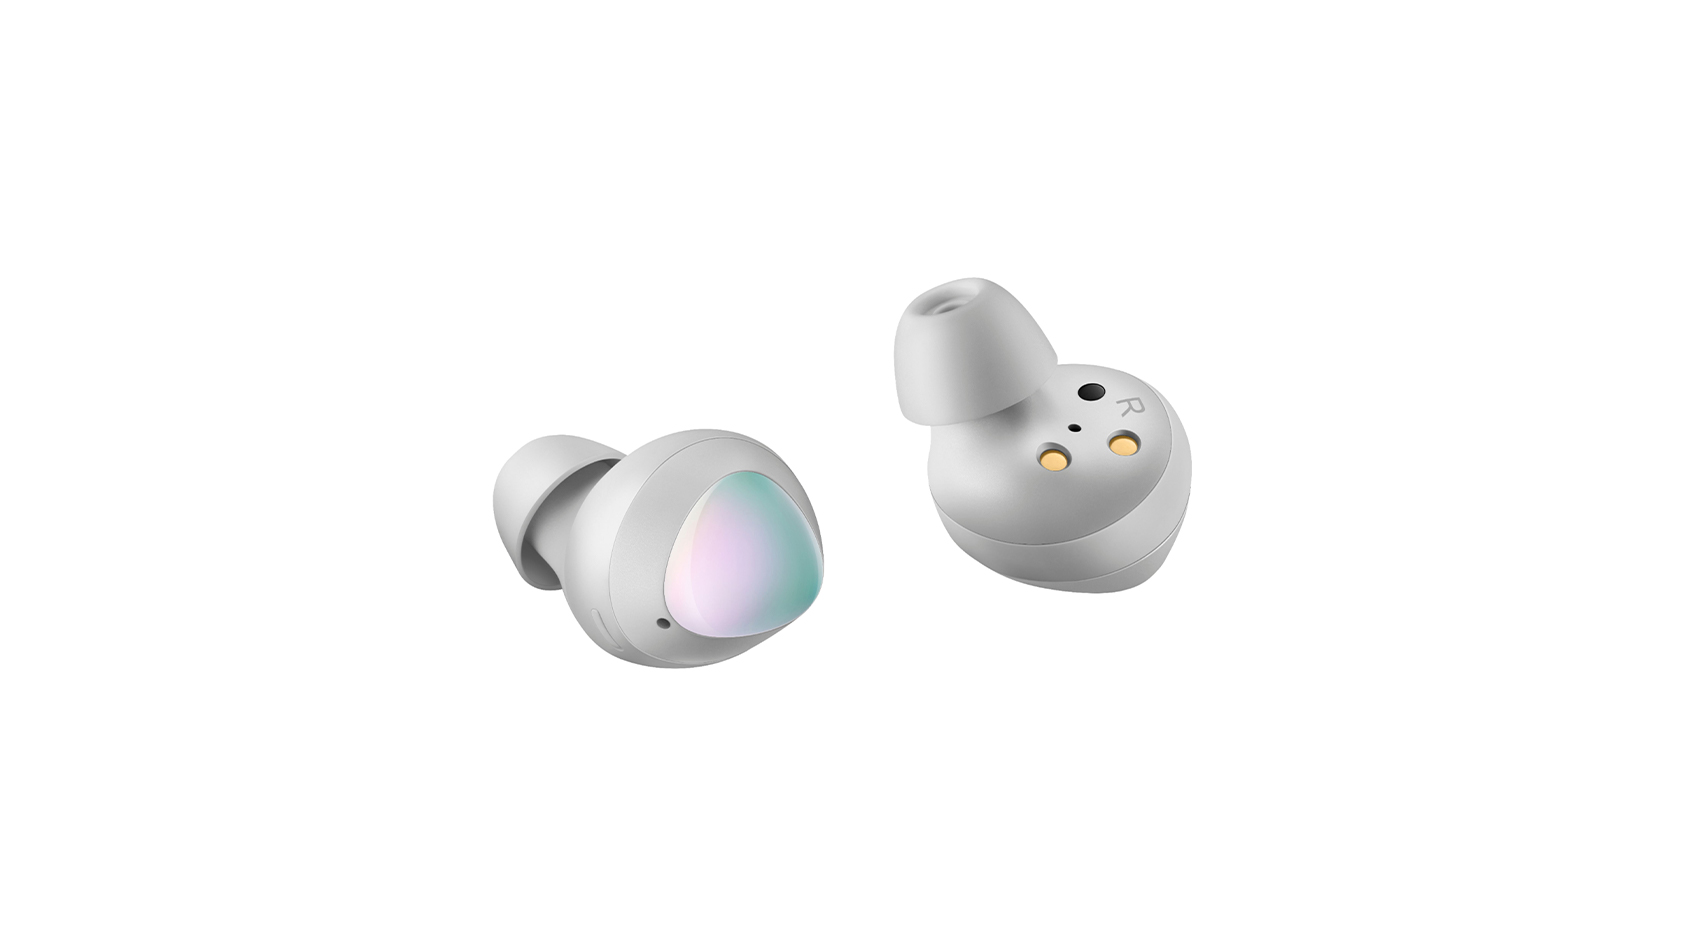 The Samsung Galaxy Buds in pearl white against a white background.